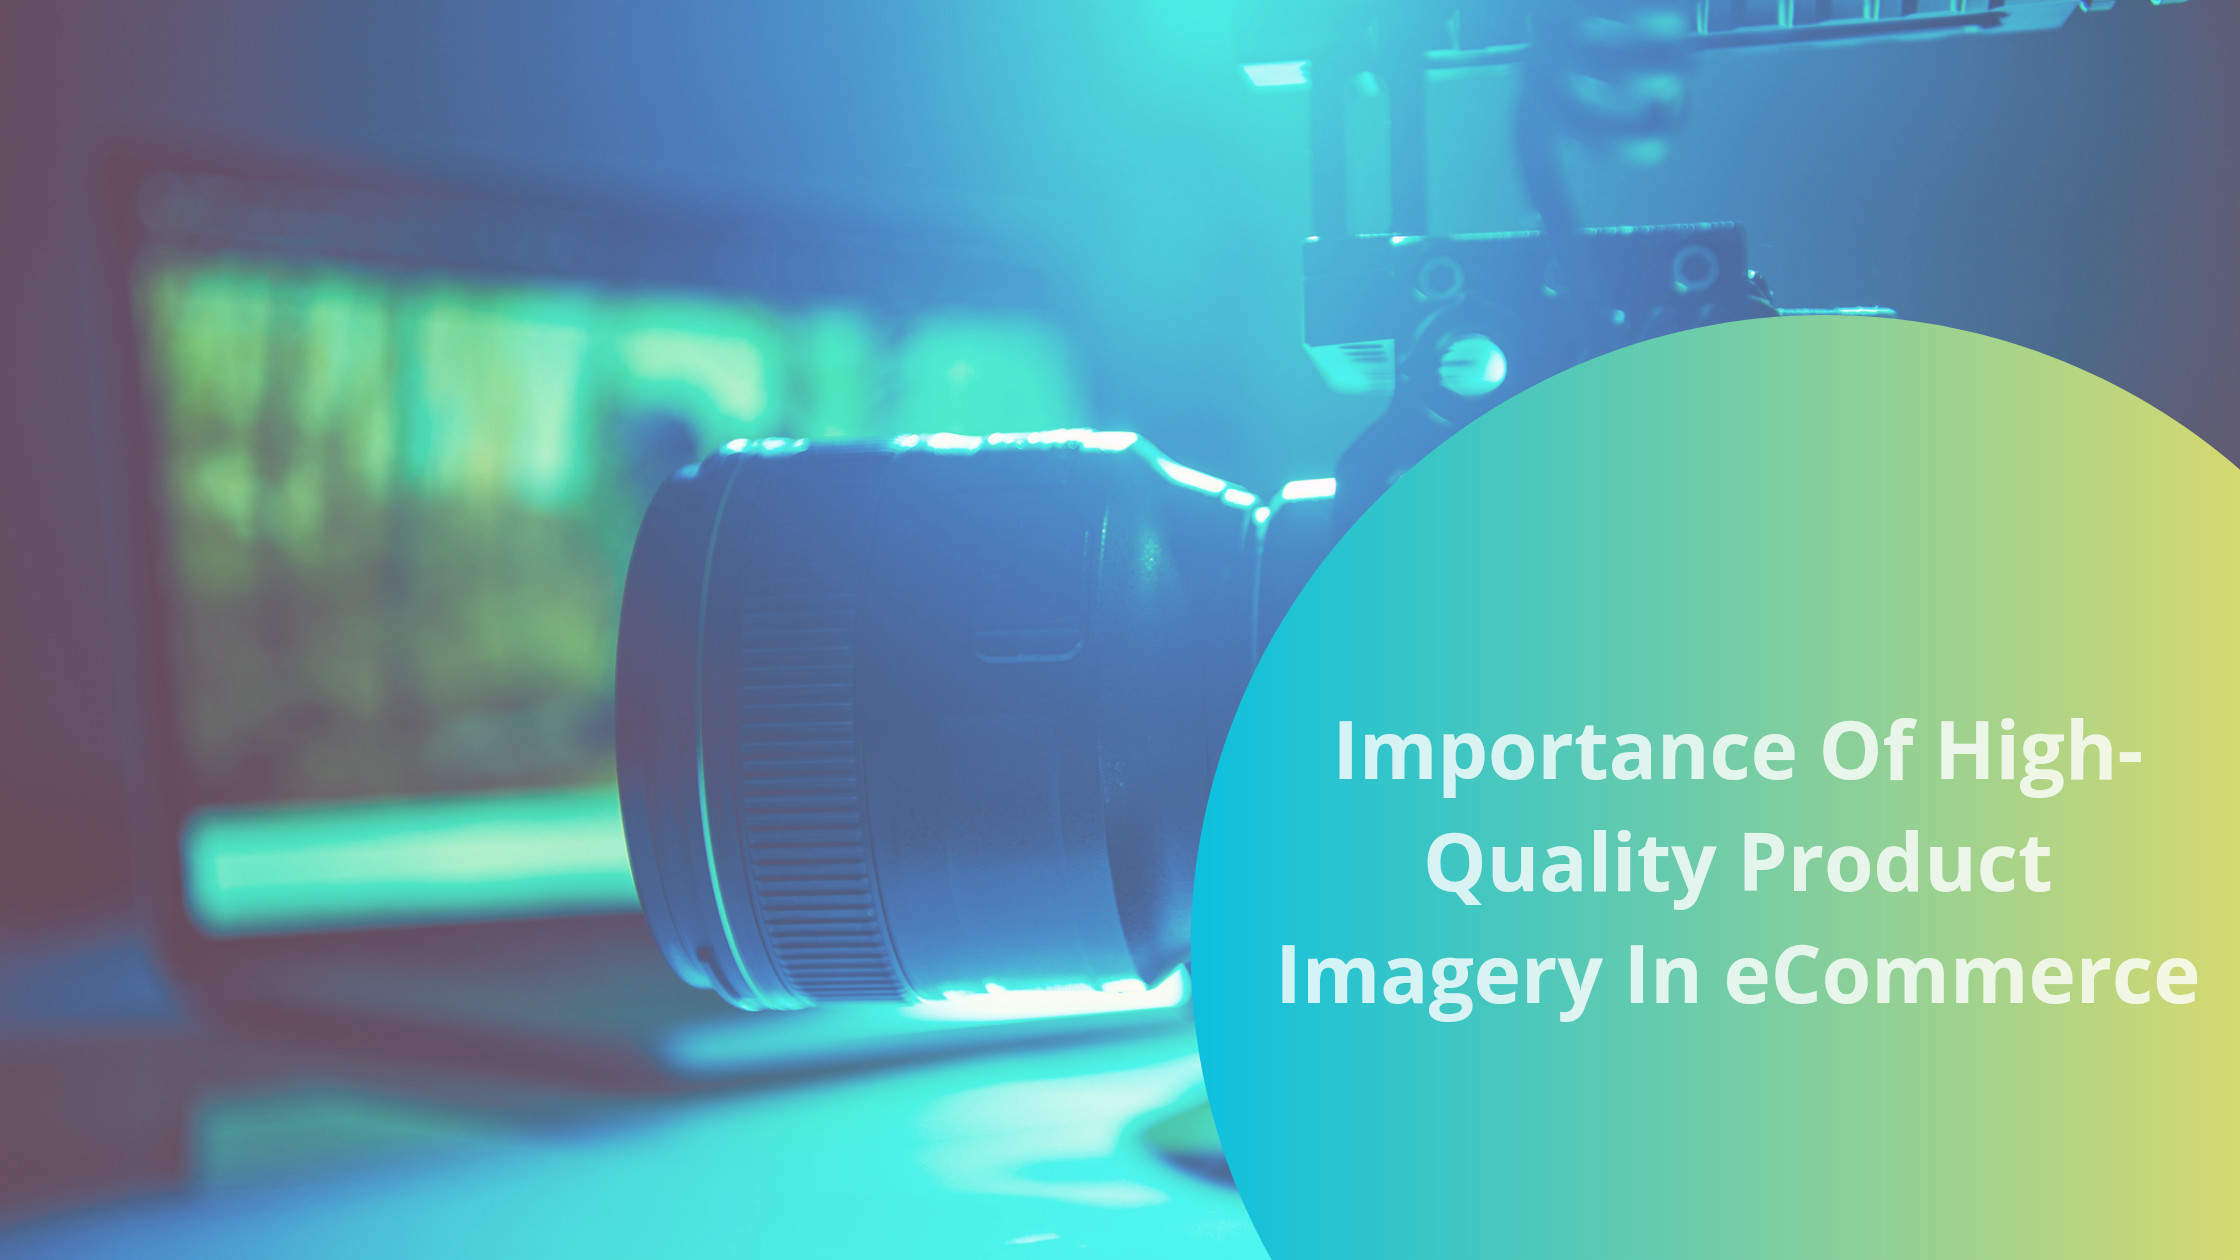 The importance of high-quality product imagery in ecommerce | bookafy